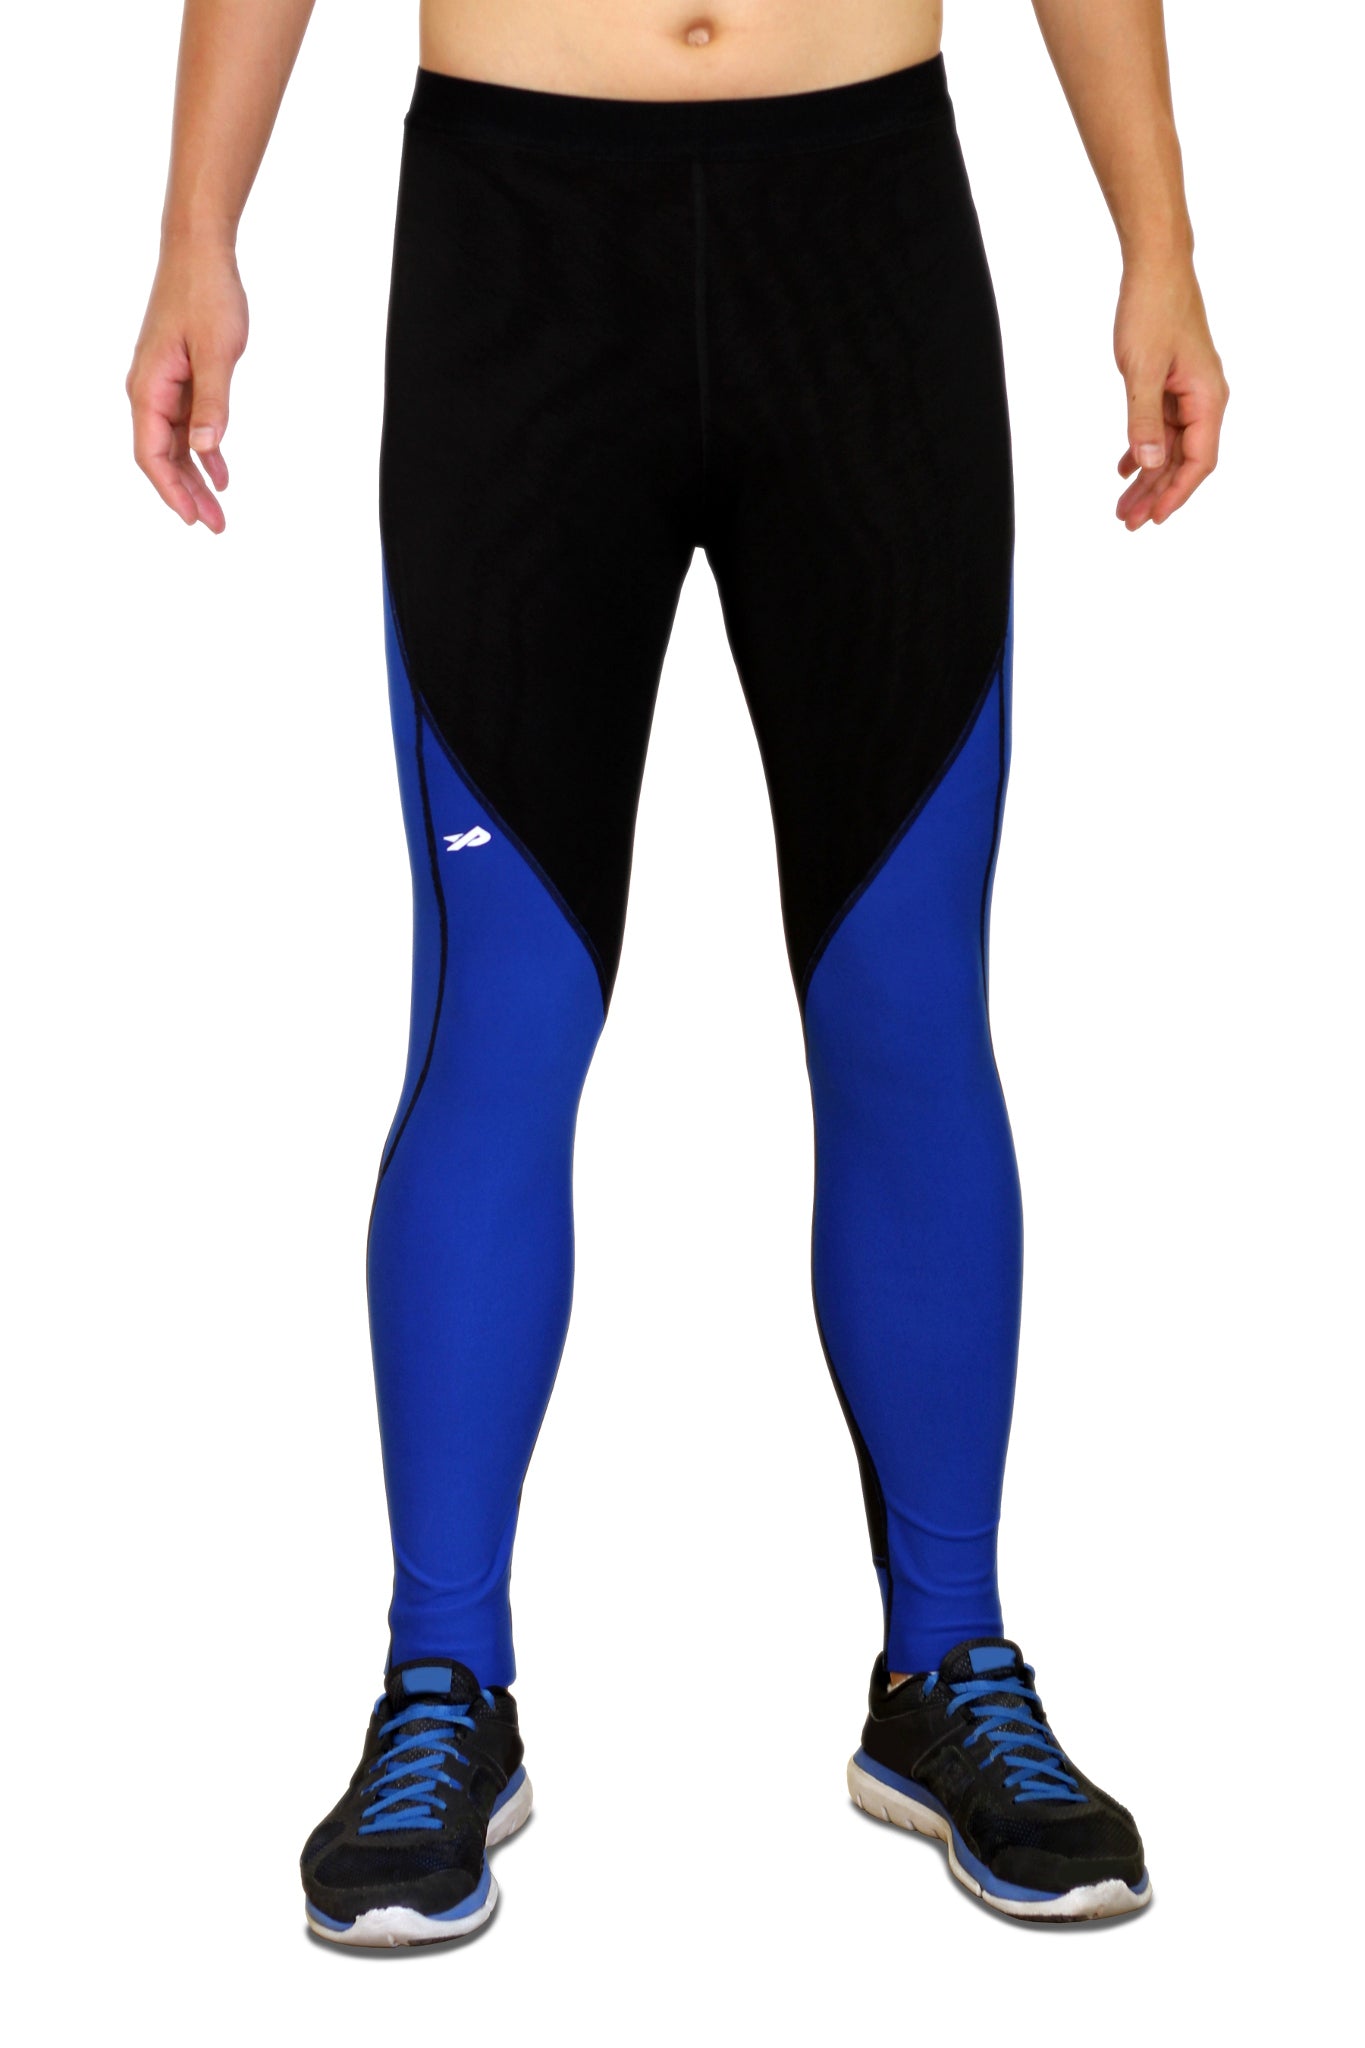 Pro Resistance Tights for Men - Navy Blue – Physiclo